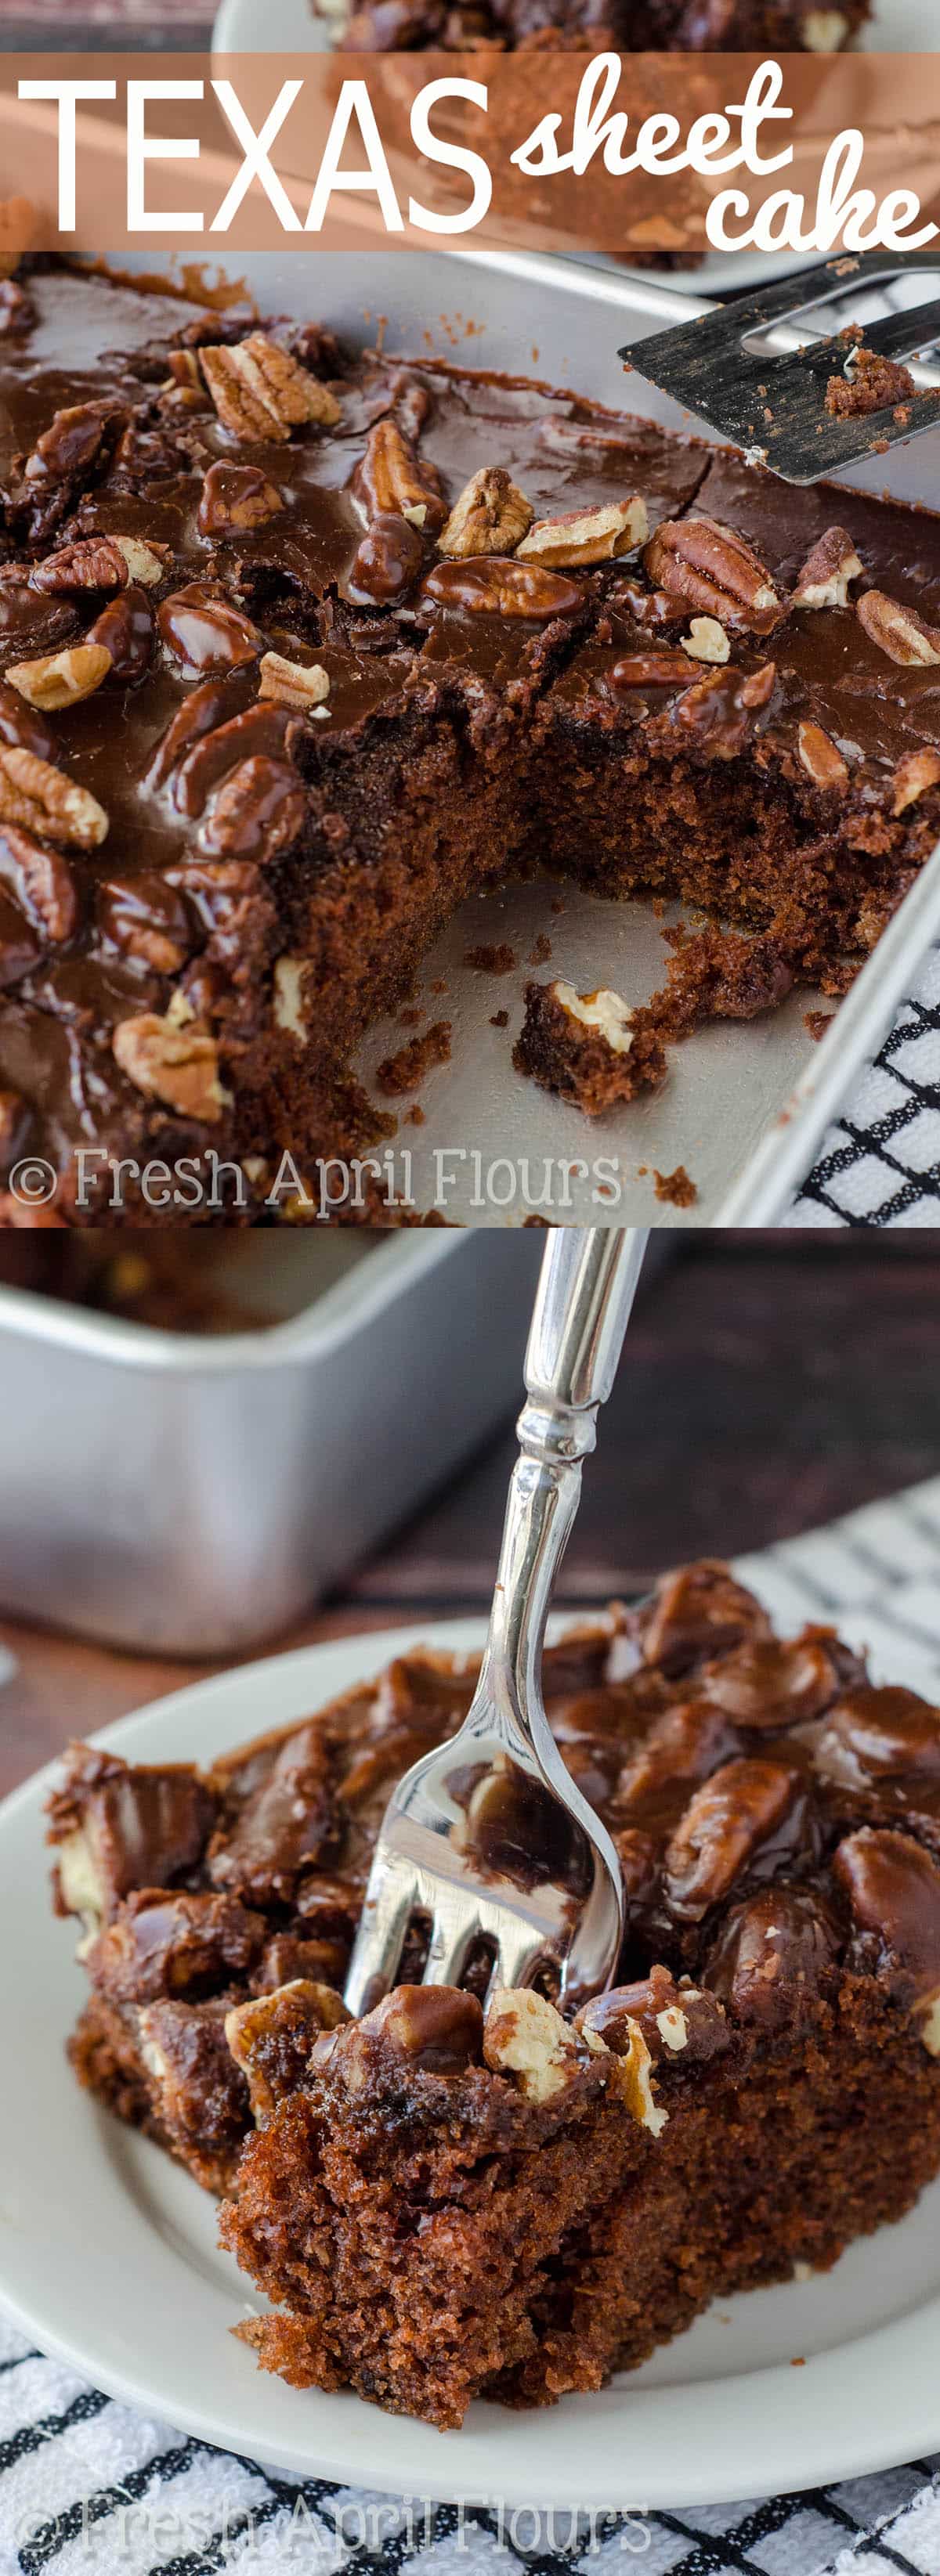 Texas Sheet Cake: Incredibly moist and chocolatey sheet cake topped with a fudgy pecan icing. via @frshaprilflours